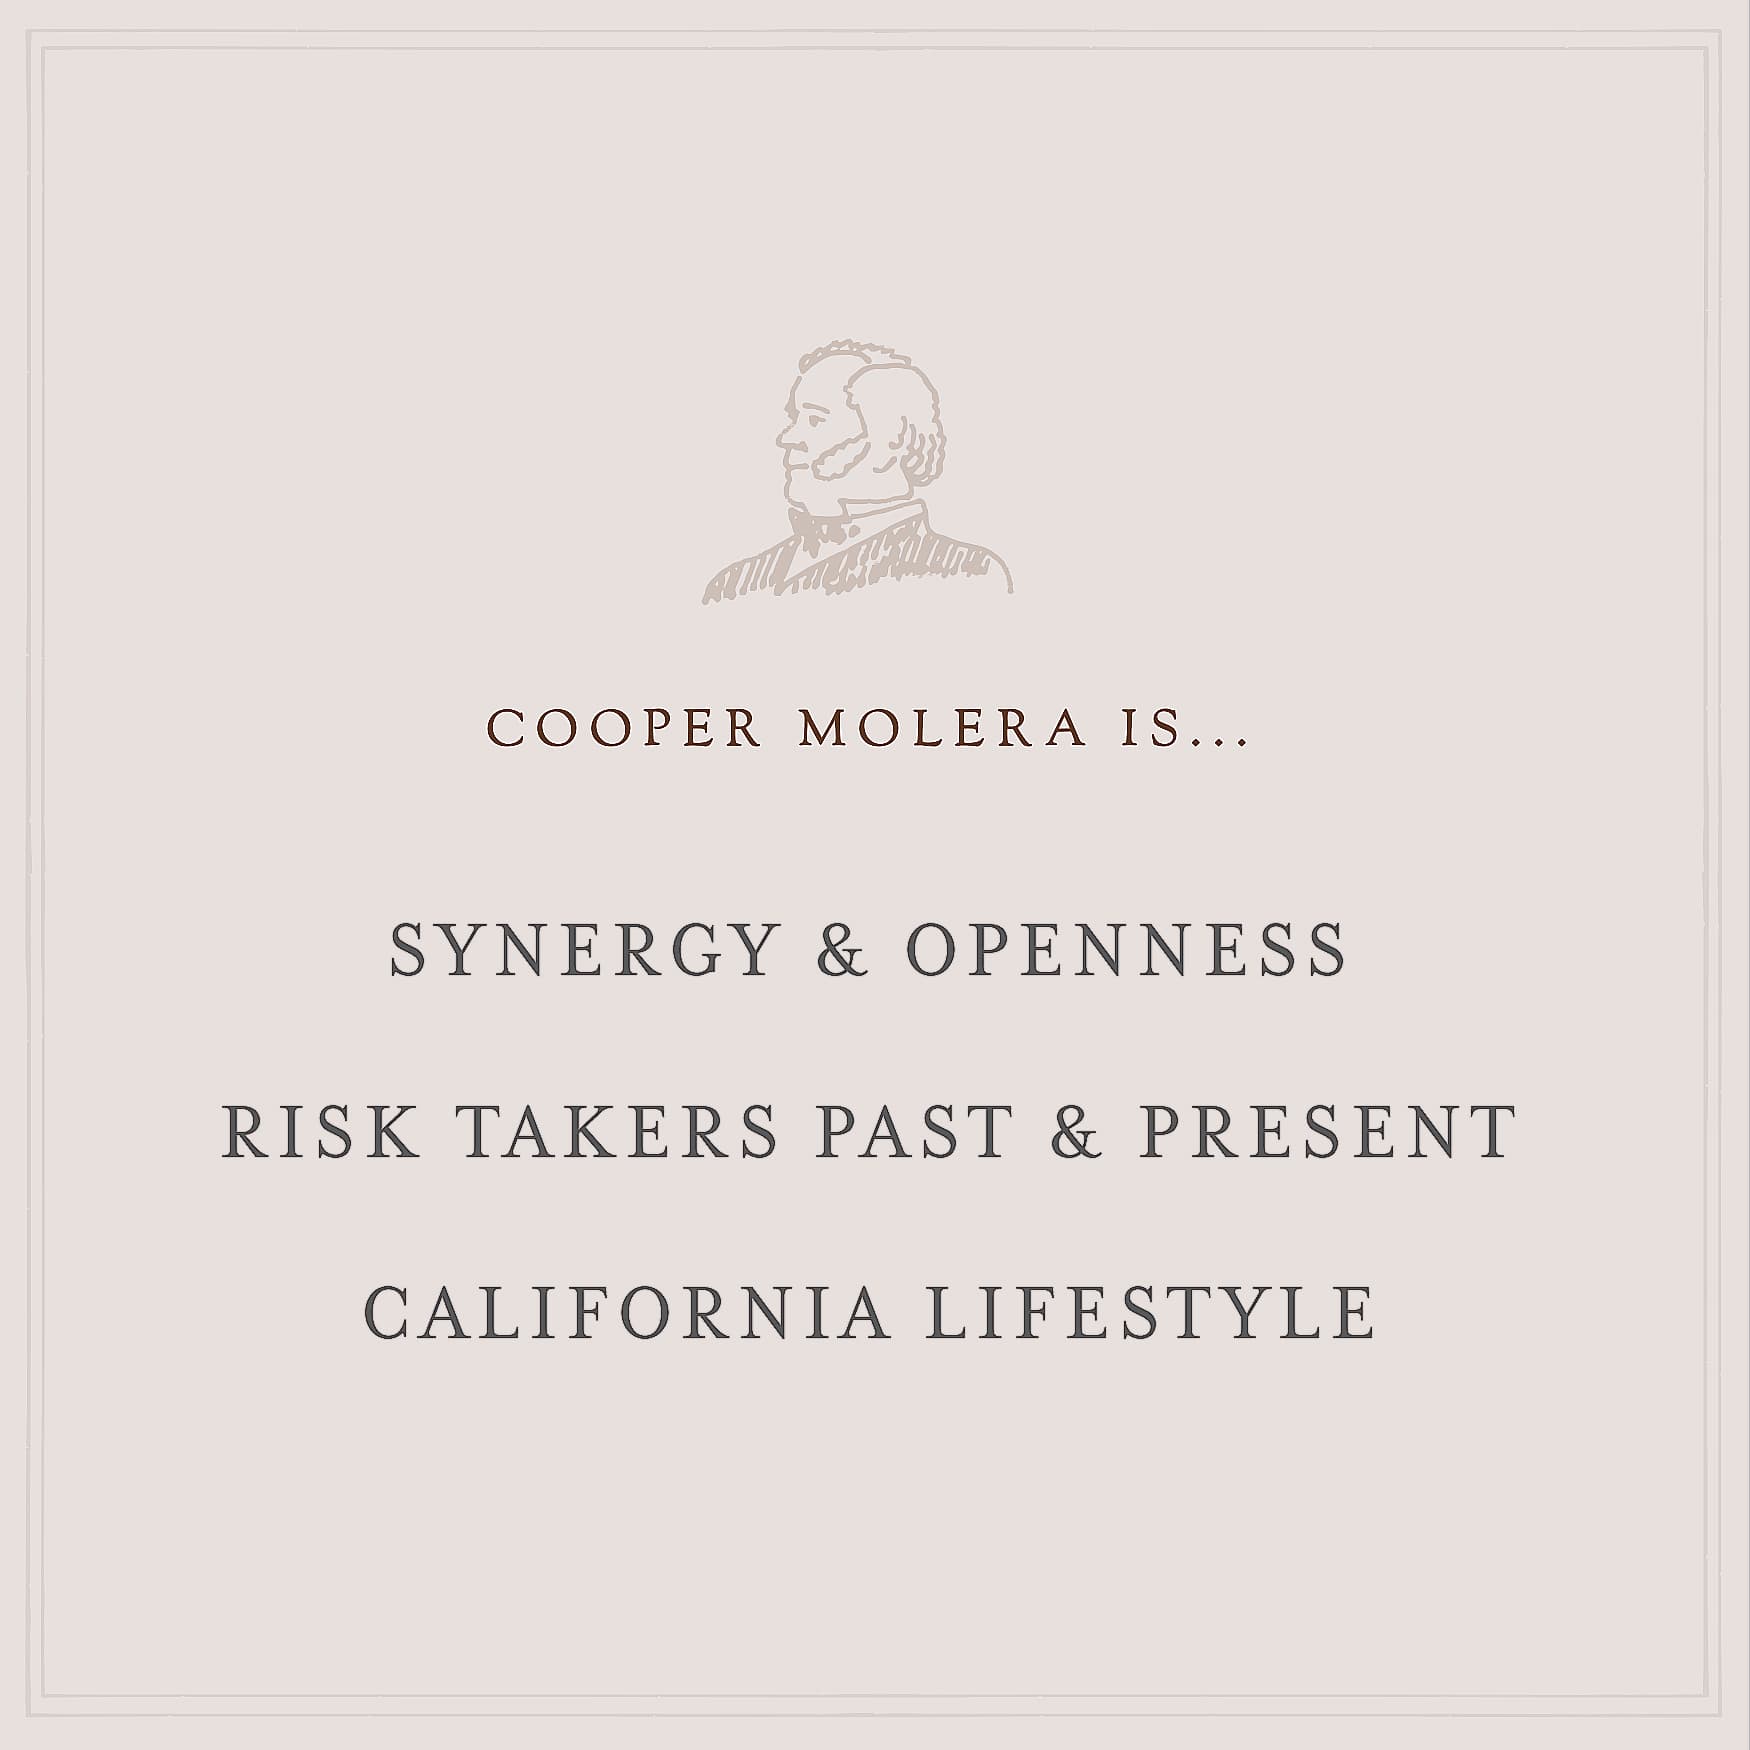 RSM Design branding and logo design services for Cooper Molera Adobe, in Monterey, California,  is a historic property jointly managed with the National Trust for Historic Preservation